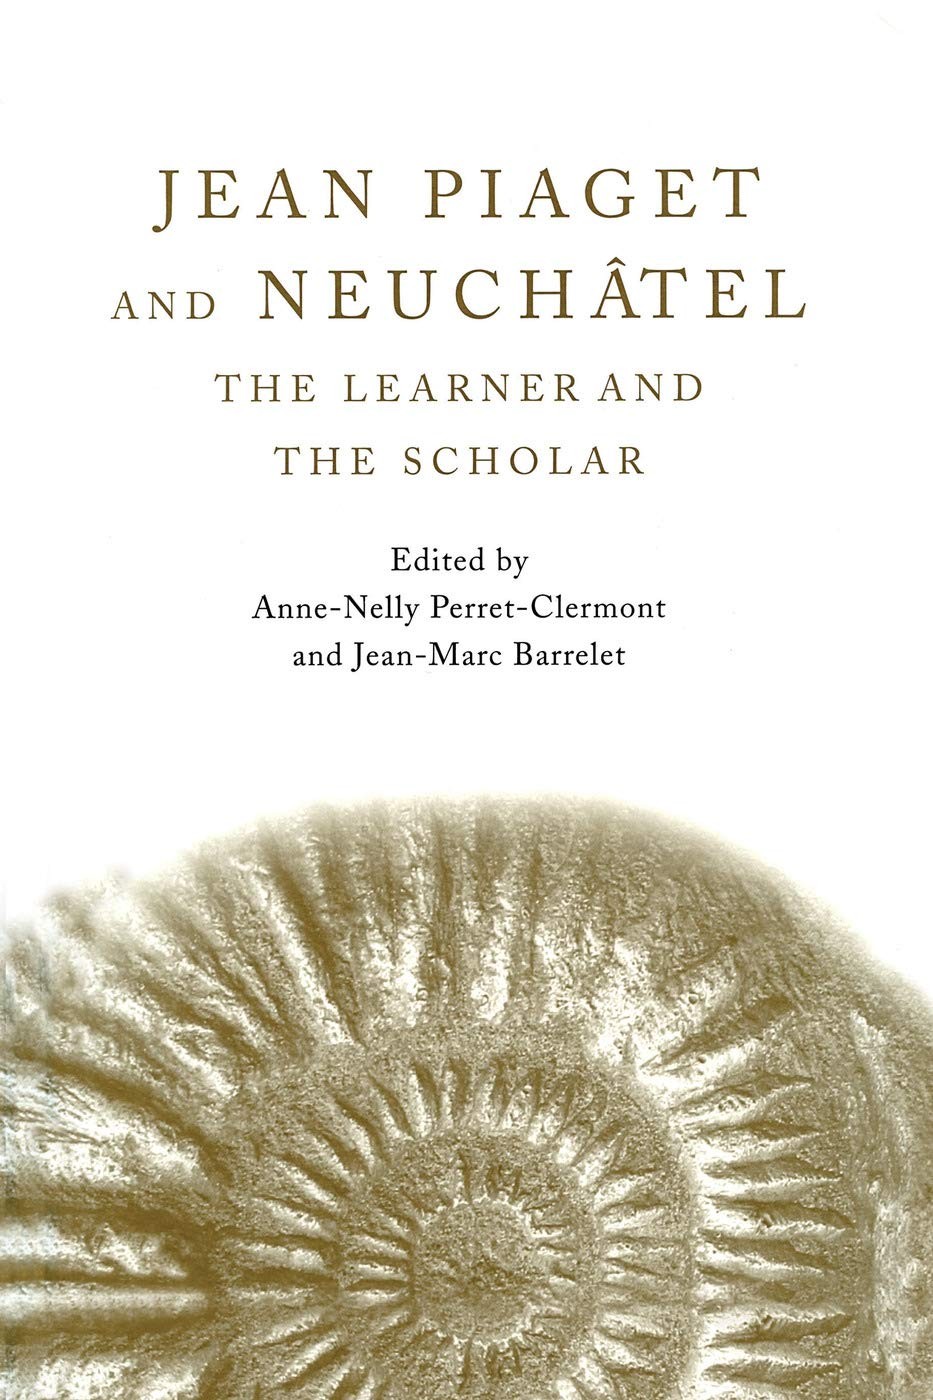 Jean Piaget and Neuchâtel: The Learner and the Scholar